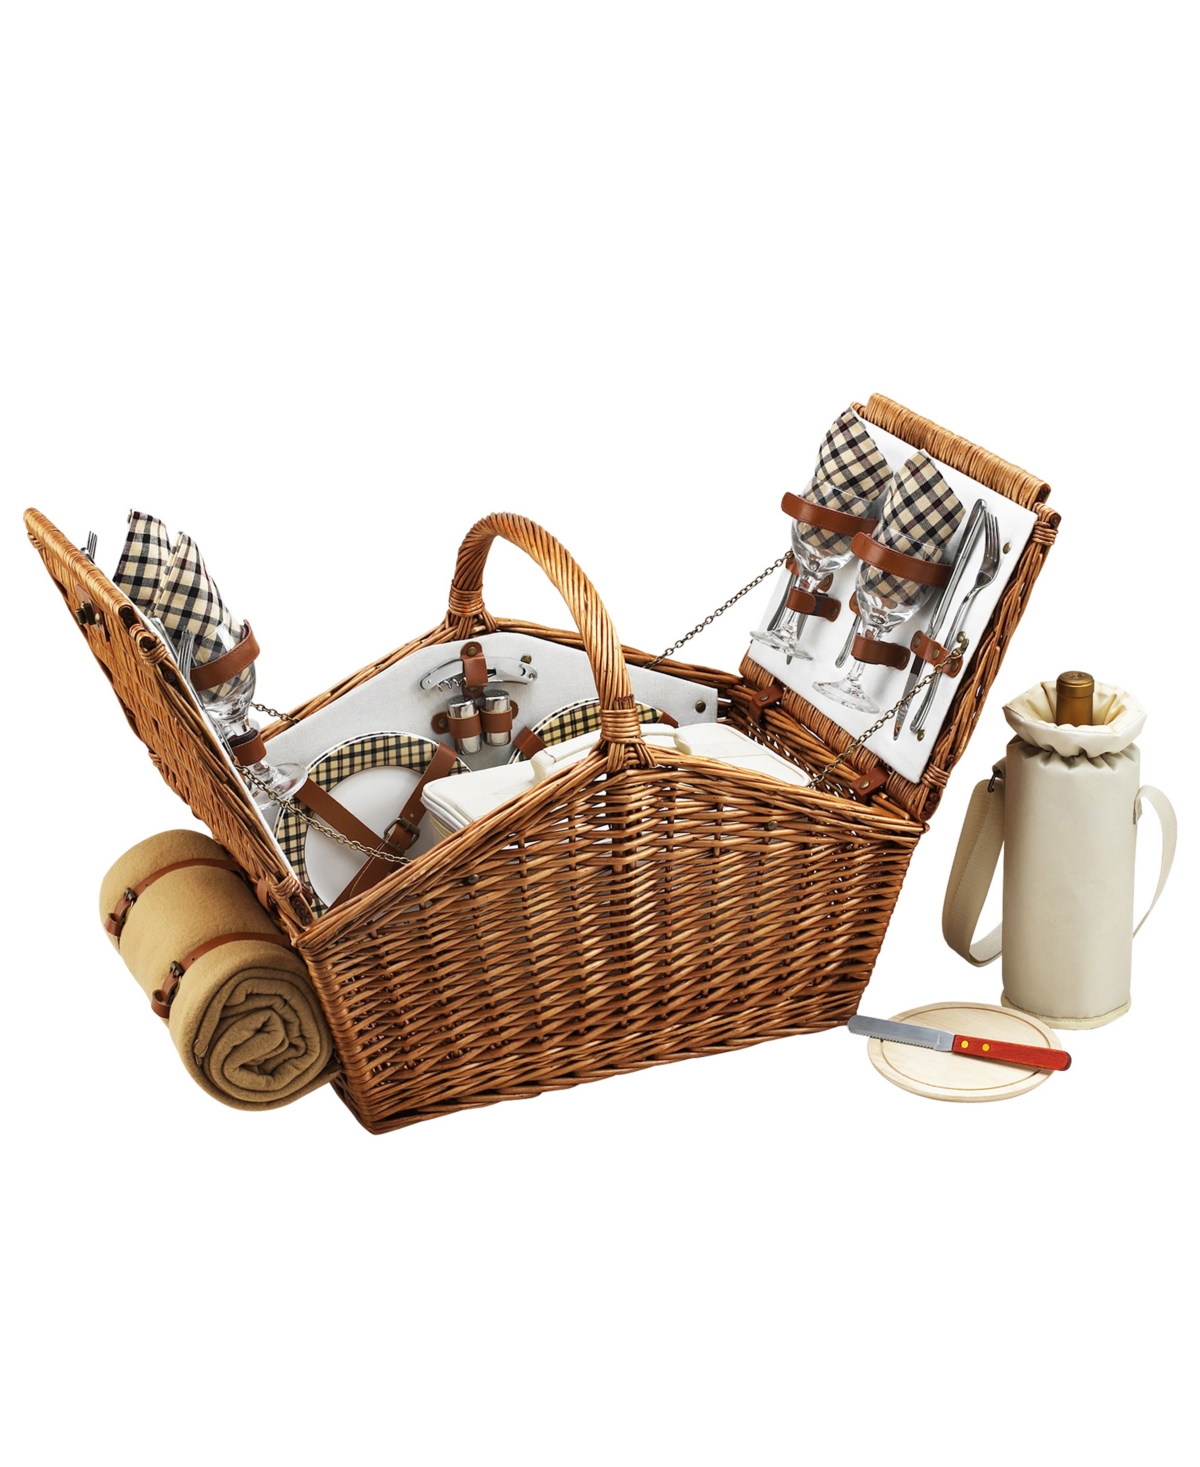 Huntsman English-Style Willow Picnic Basket for 4 with Blanket - Turquoise